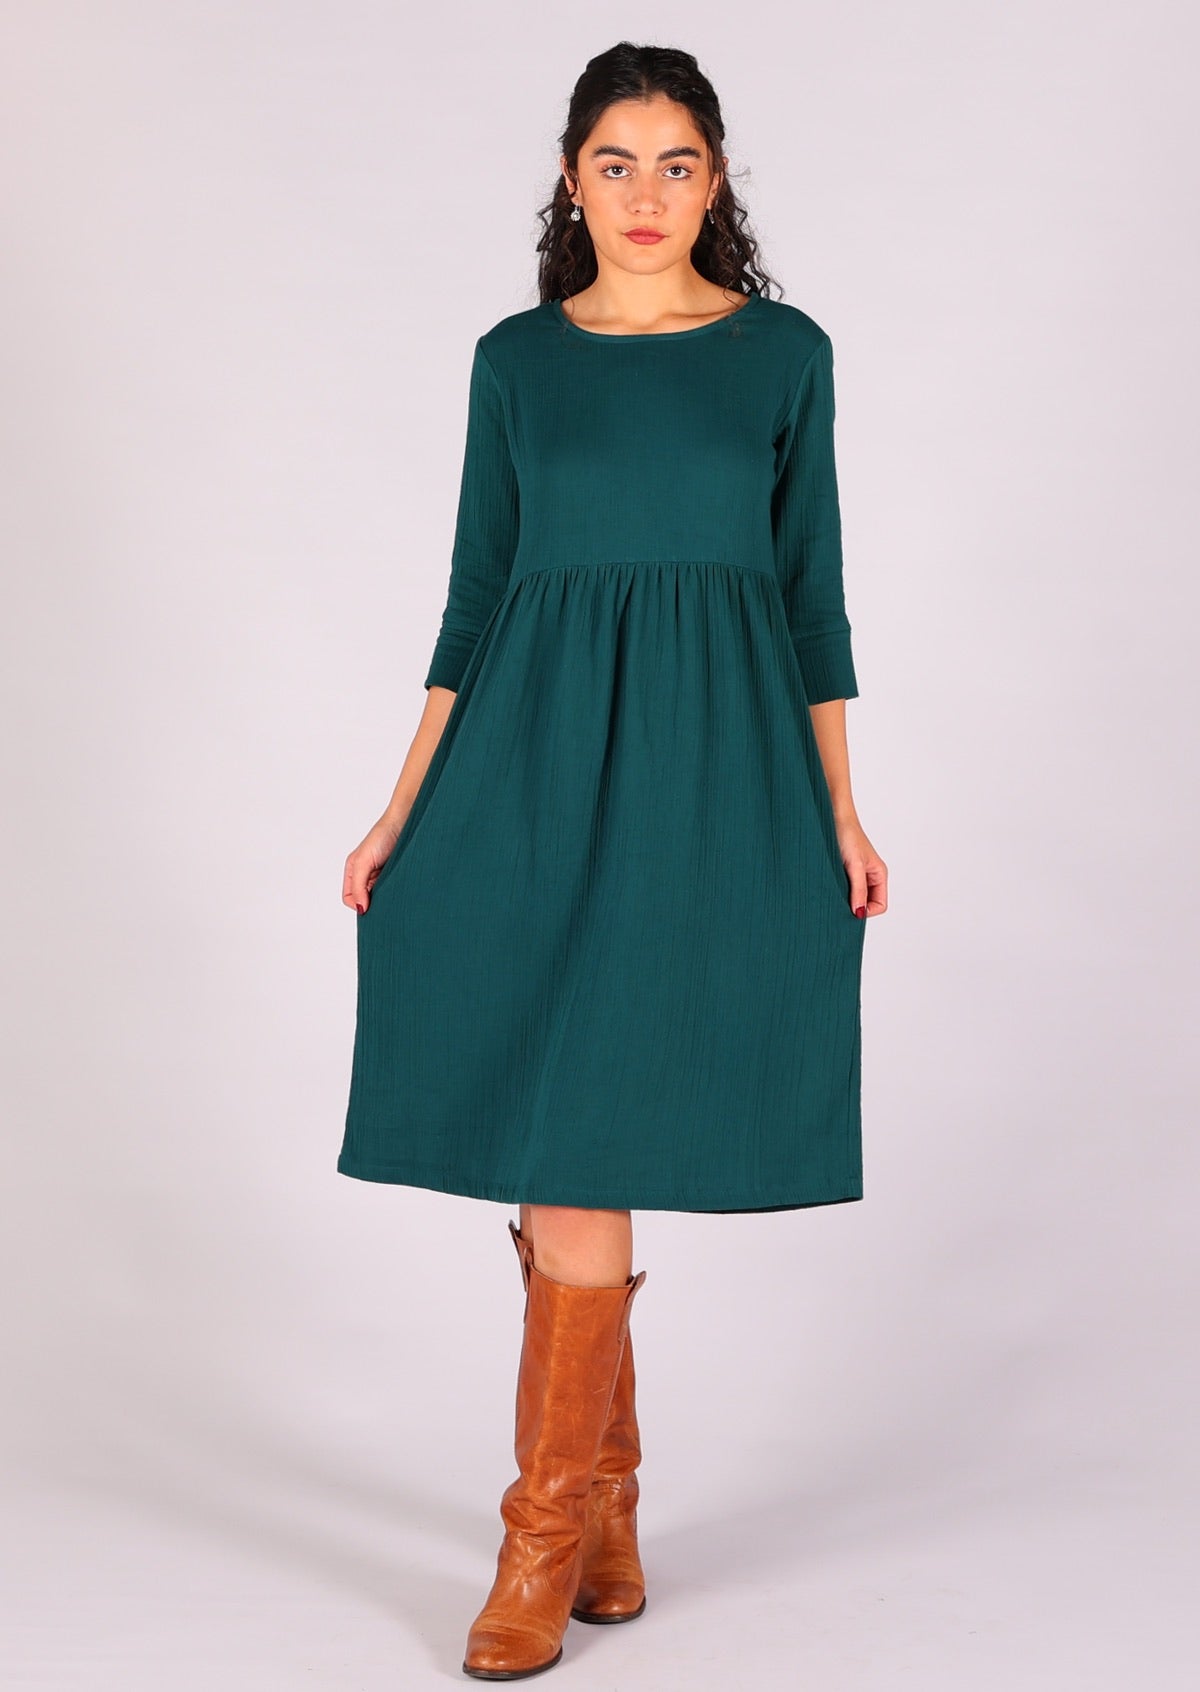 Super comfortable double cotton dress in beautiful deep teal with 3/4 sleeves and round neckline